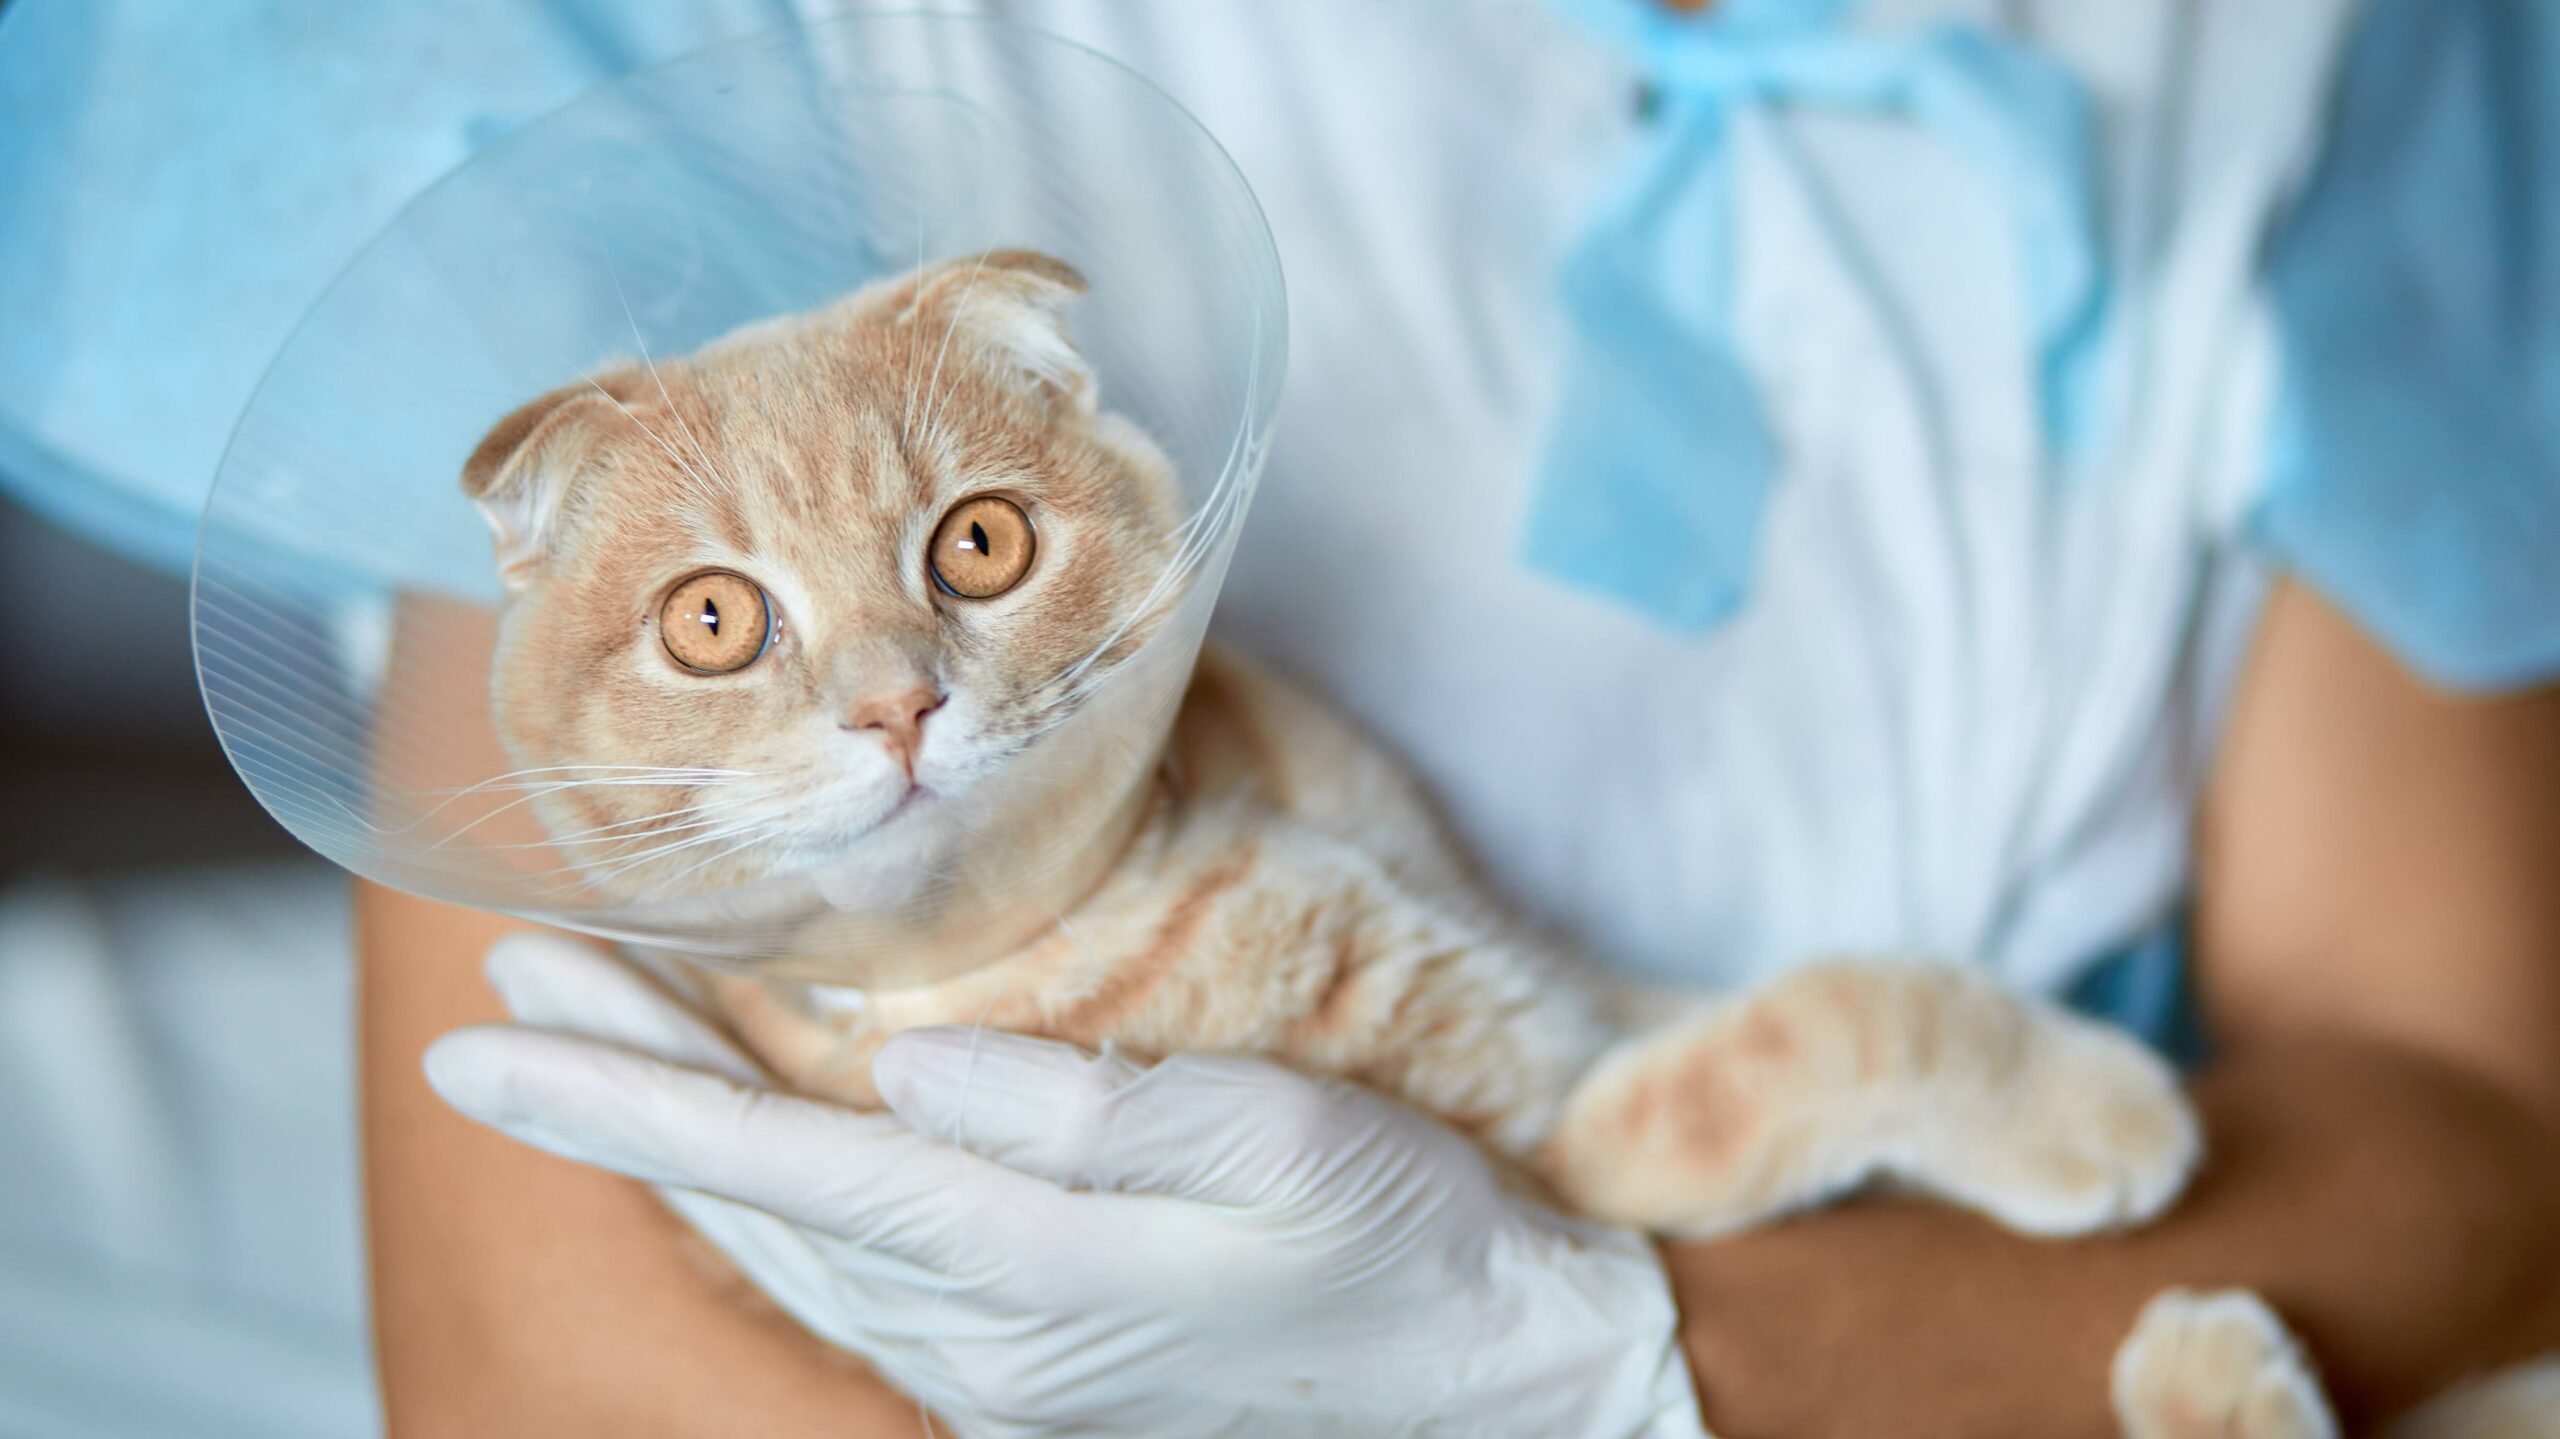 Female veterinarian doctor is holding on her hands a cat with plastic cone collar after castration, Veterinary Concept.